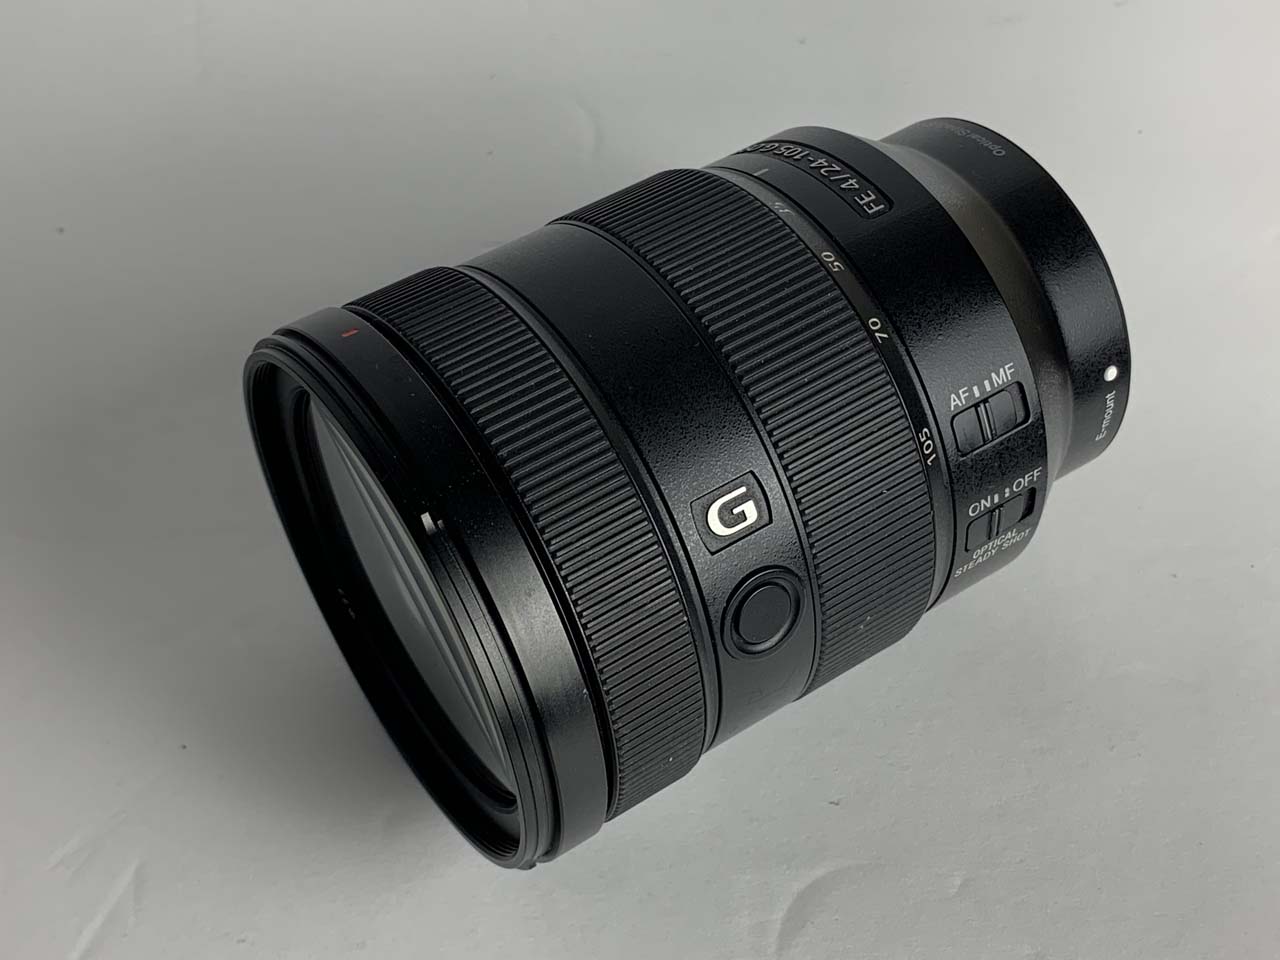 Sony SEL24105G Review: The Best Flexible Zoom Lens?